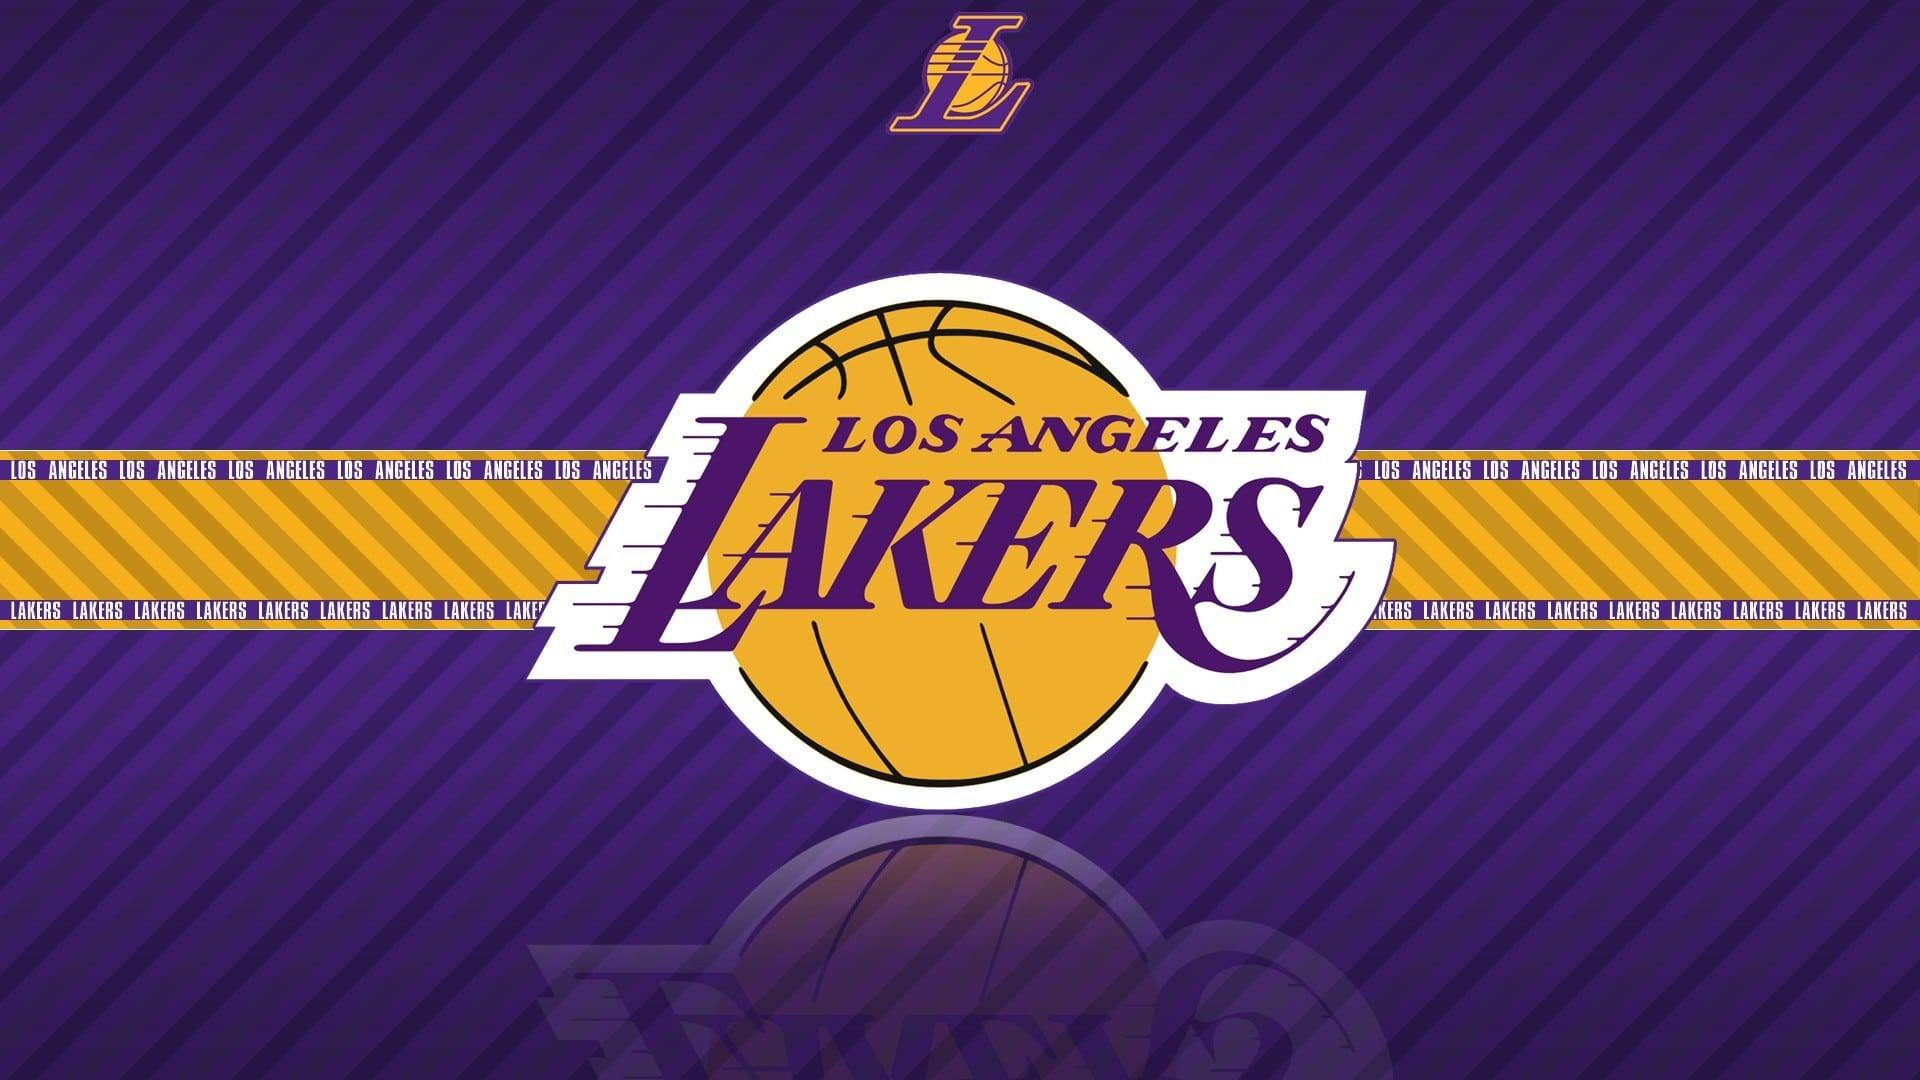 Lakers Docuseries About The Los Angeles Team Coming To Hulu